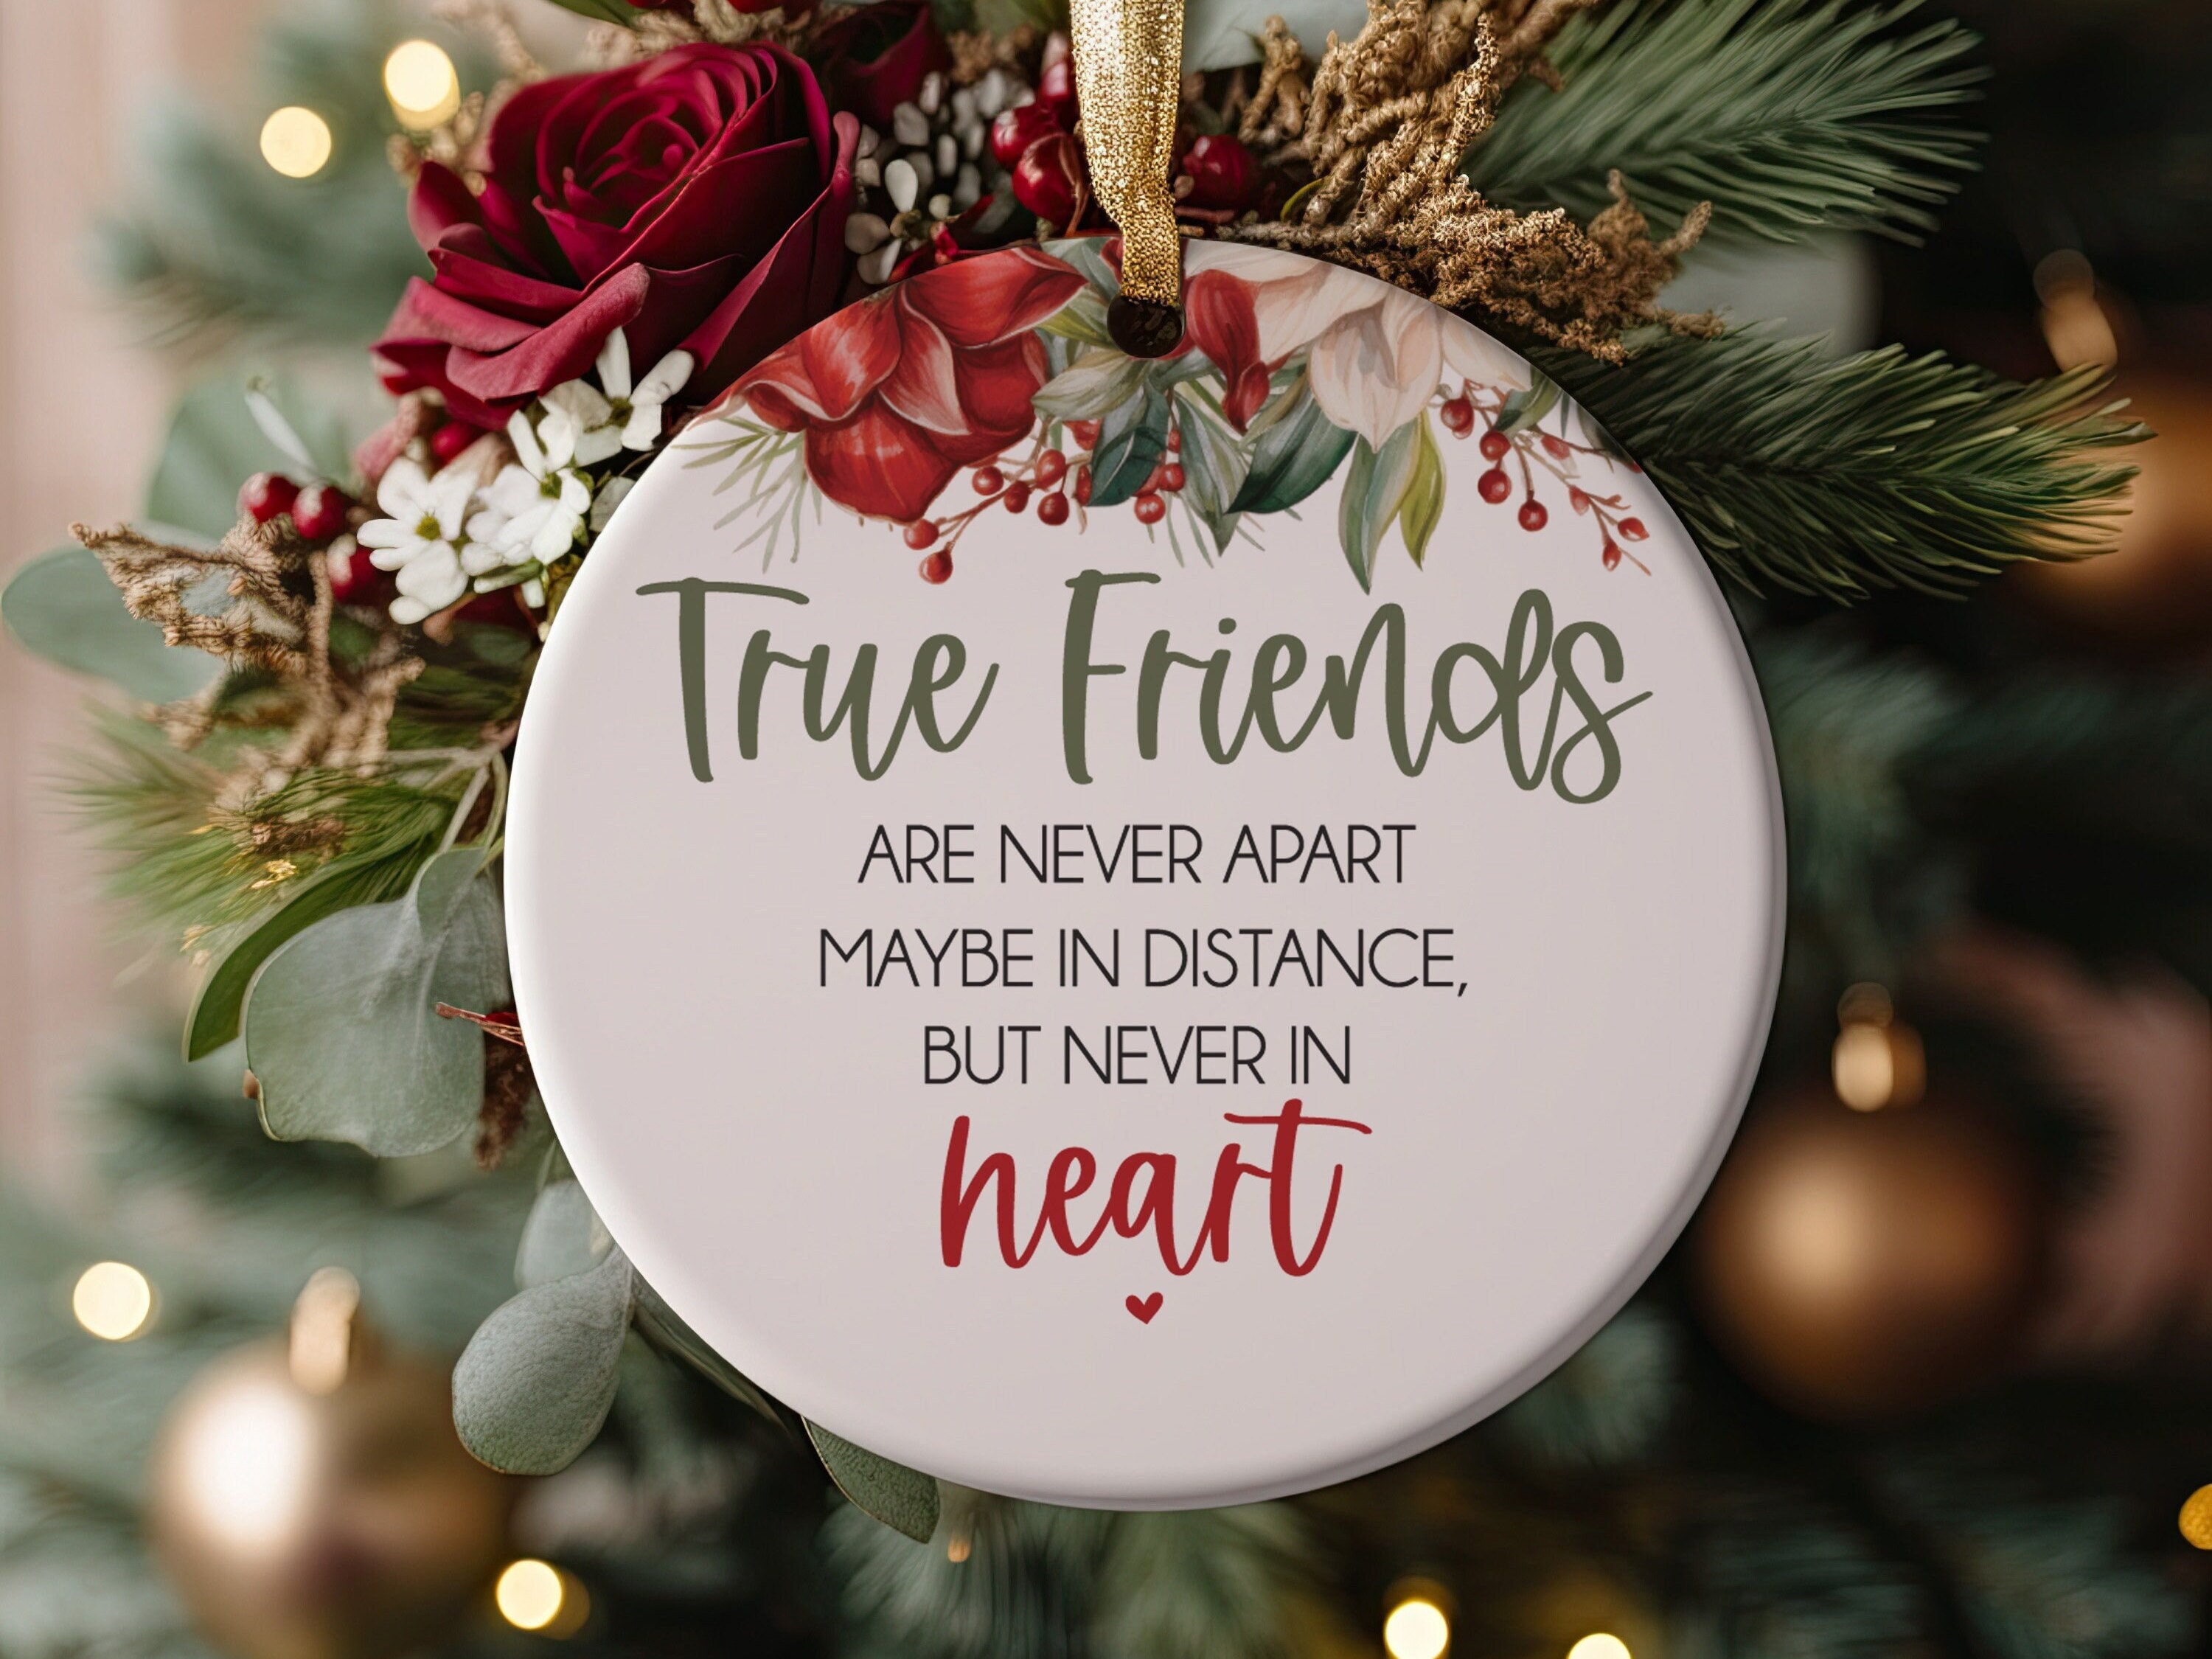 900+ Friends​hip Quotes ideas in 2023  friends quotes, friendship quotes,  best friend quotes